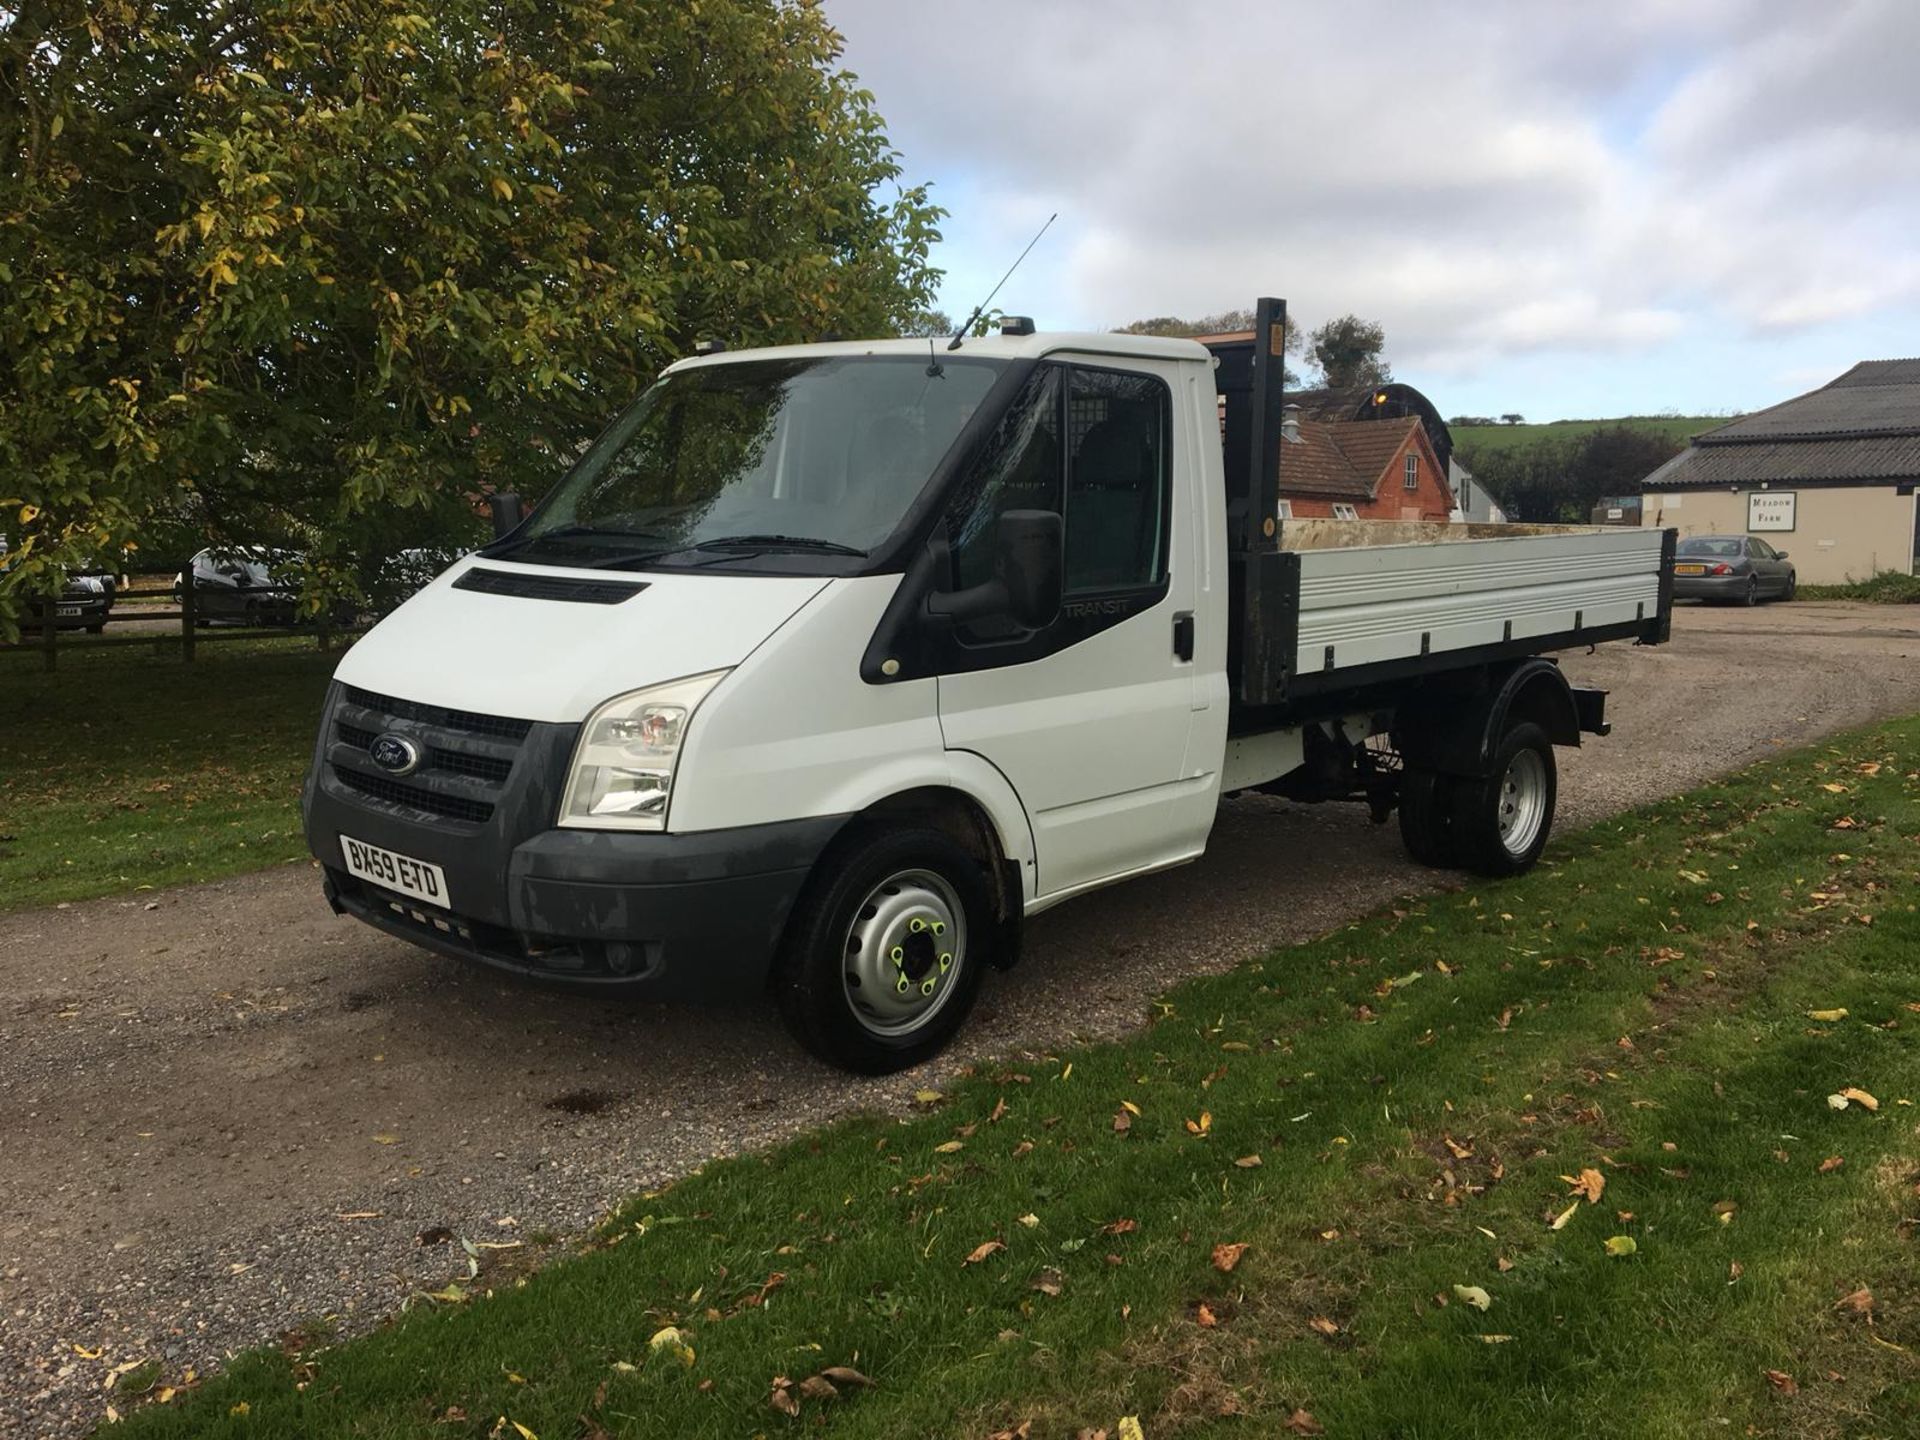 2010/59 REG FORD TRANSIT 100 T350M RWD WHITE DIESEL TIPPER, SHOWING 0 FORMER KEEPERS *NO VAT* - Image 3 of 12